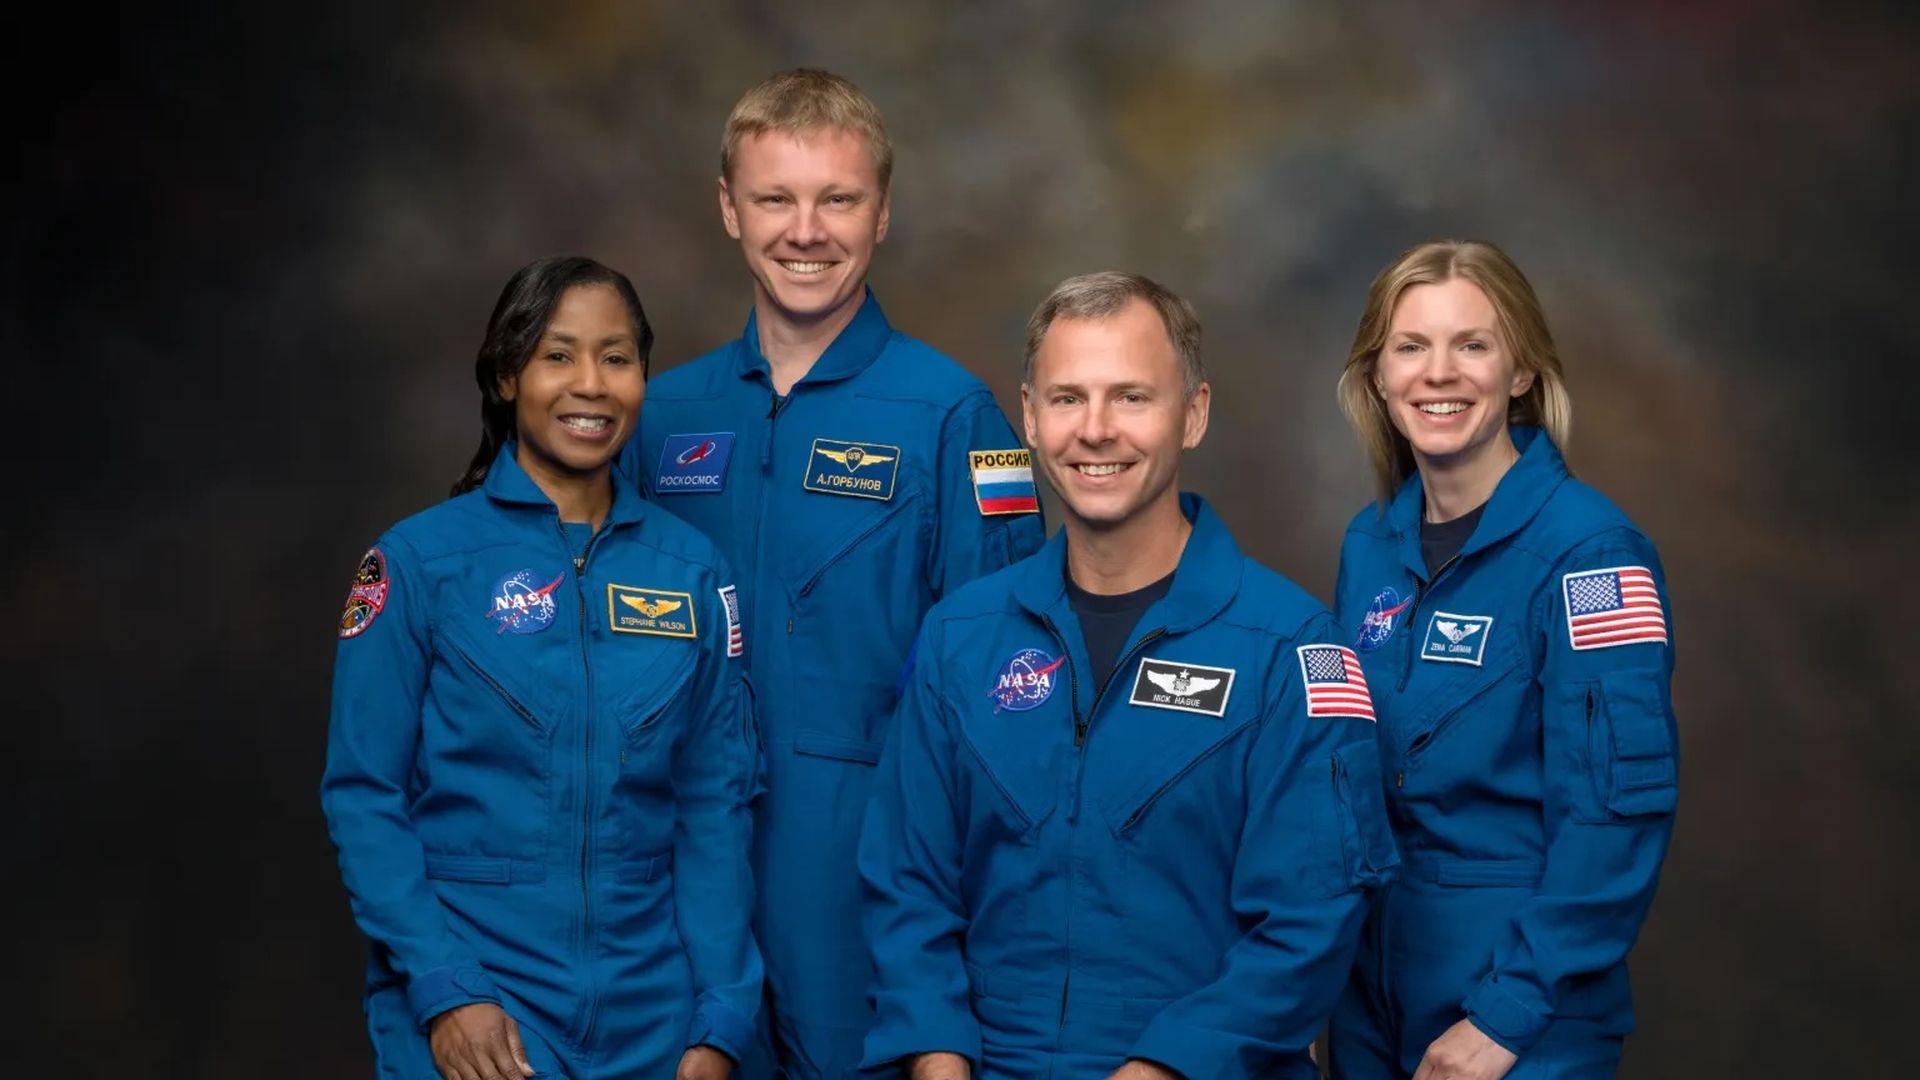 Four astronauts wearing blue jumpsuits pose for a group photo